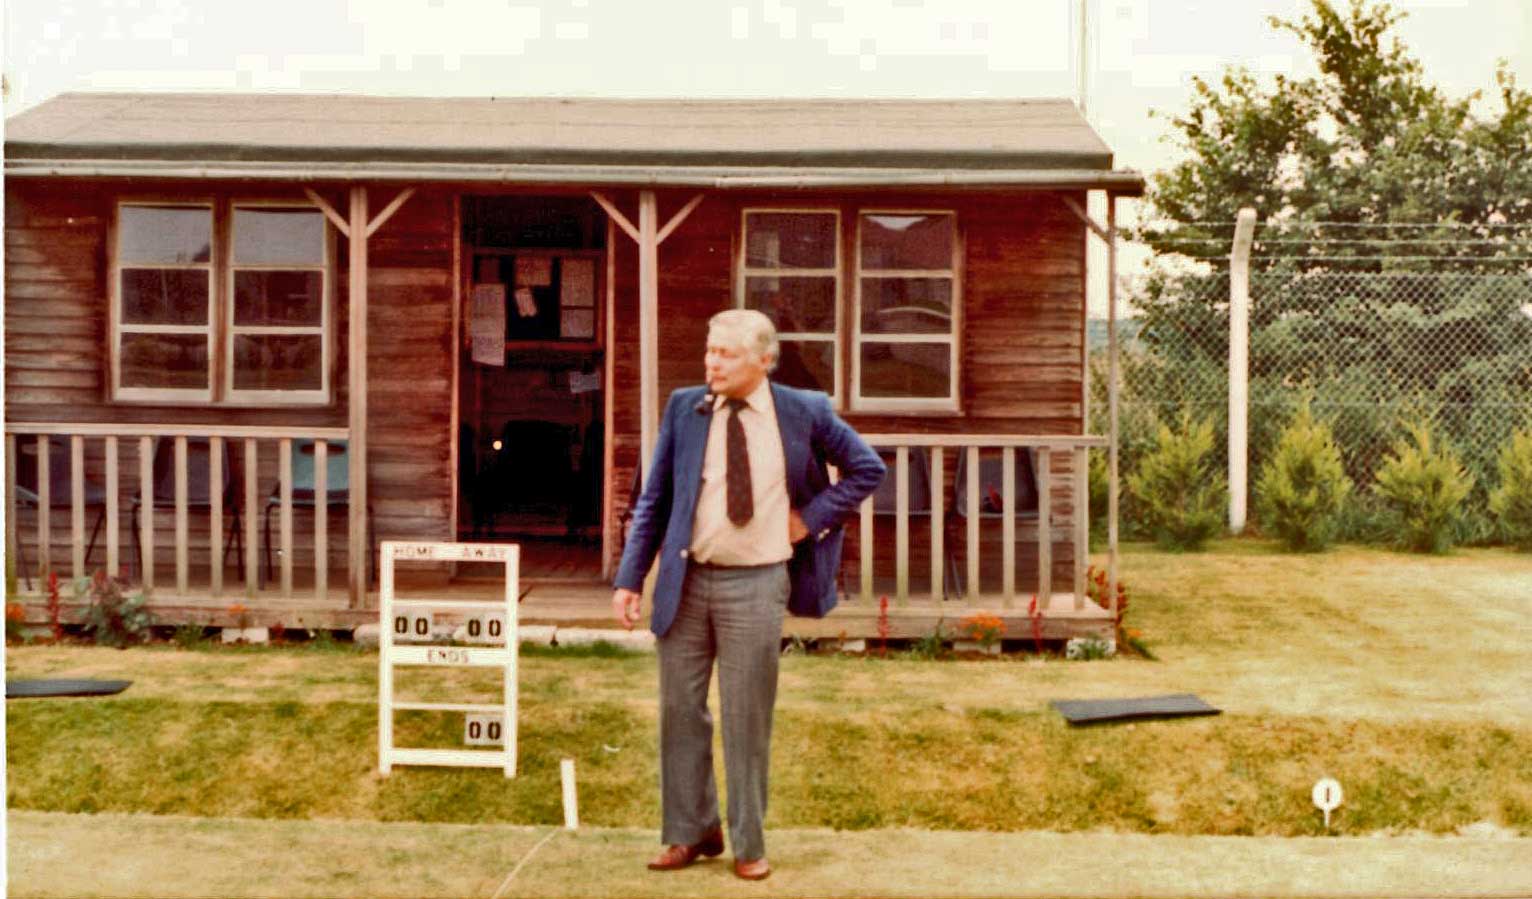 Original Cedarwood Pavilion with first Club Captain, Don Milnes in foreground